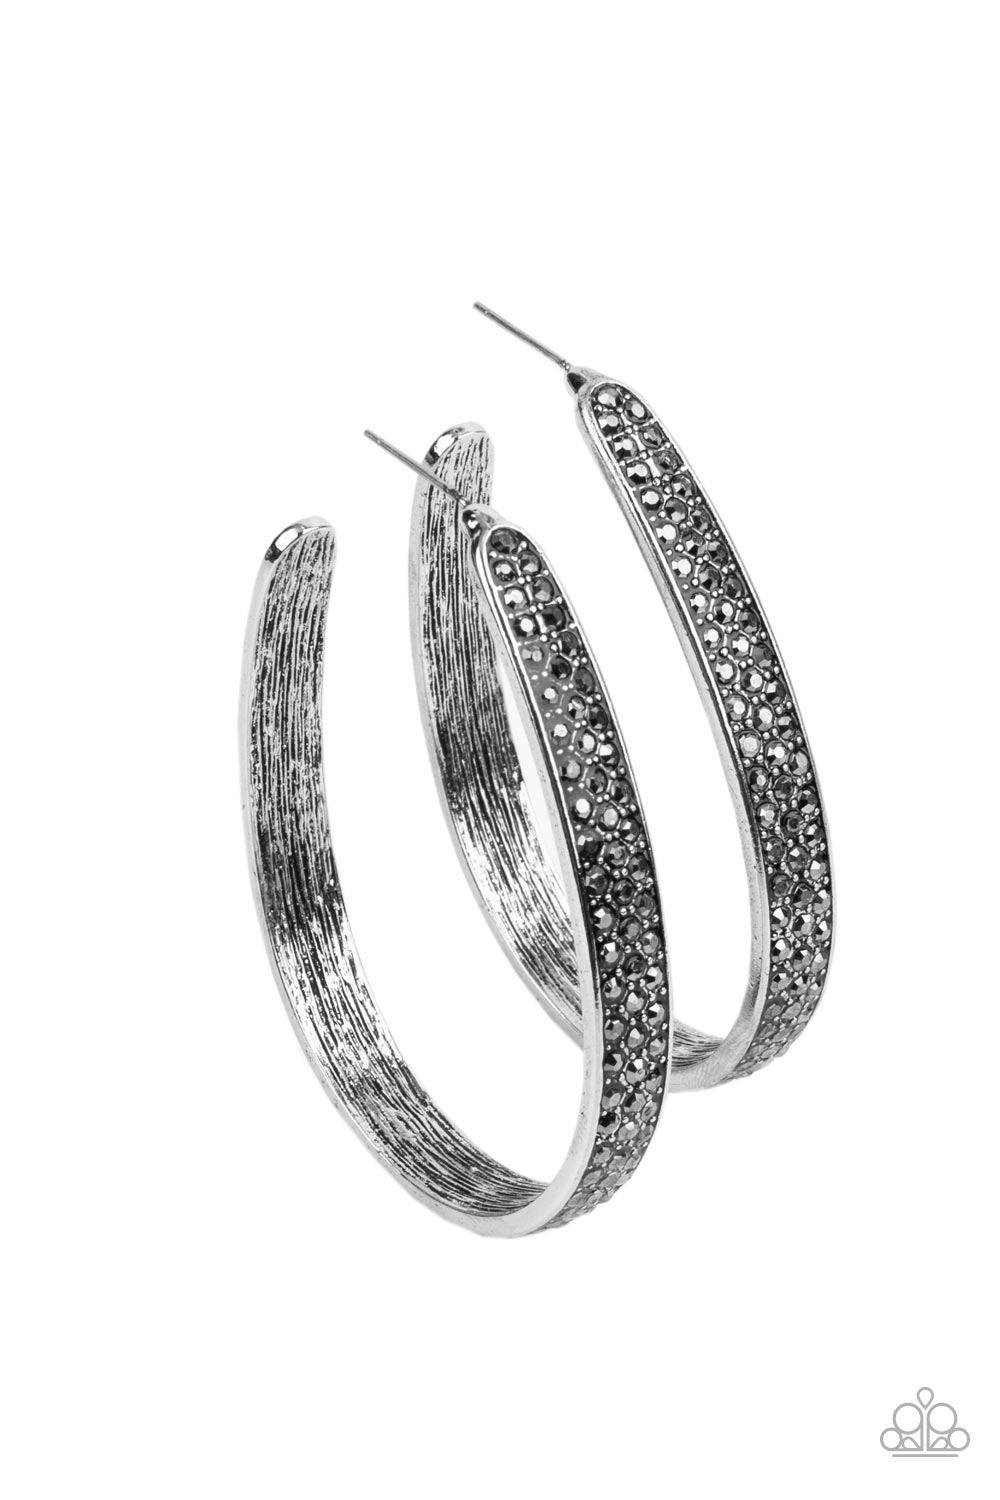 Paparazzi - Bossy and Glossy - Silver Earrings - Alies Bling Bar